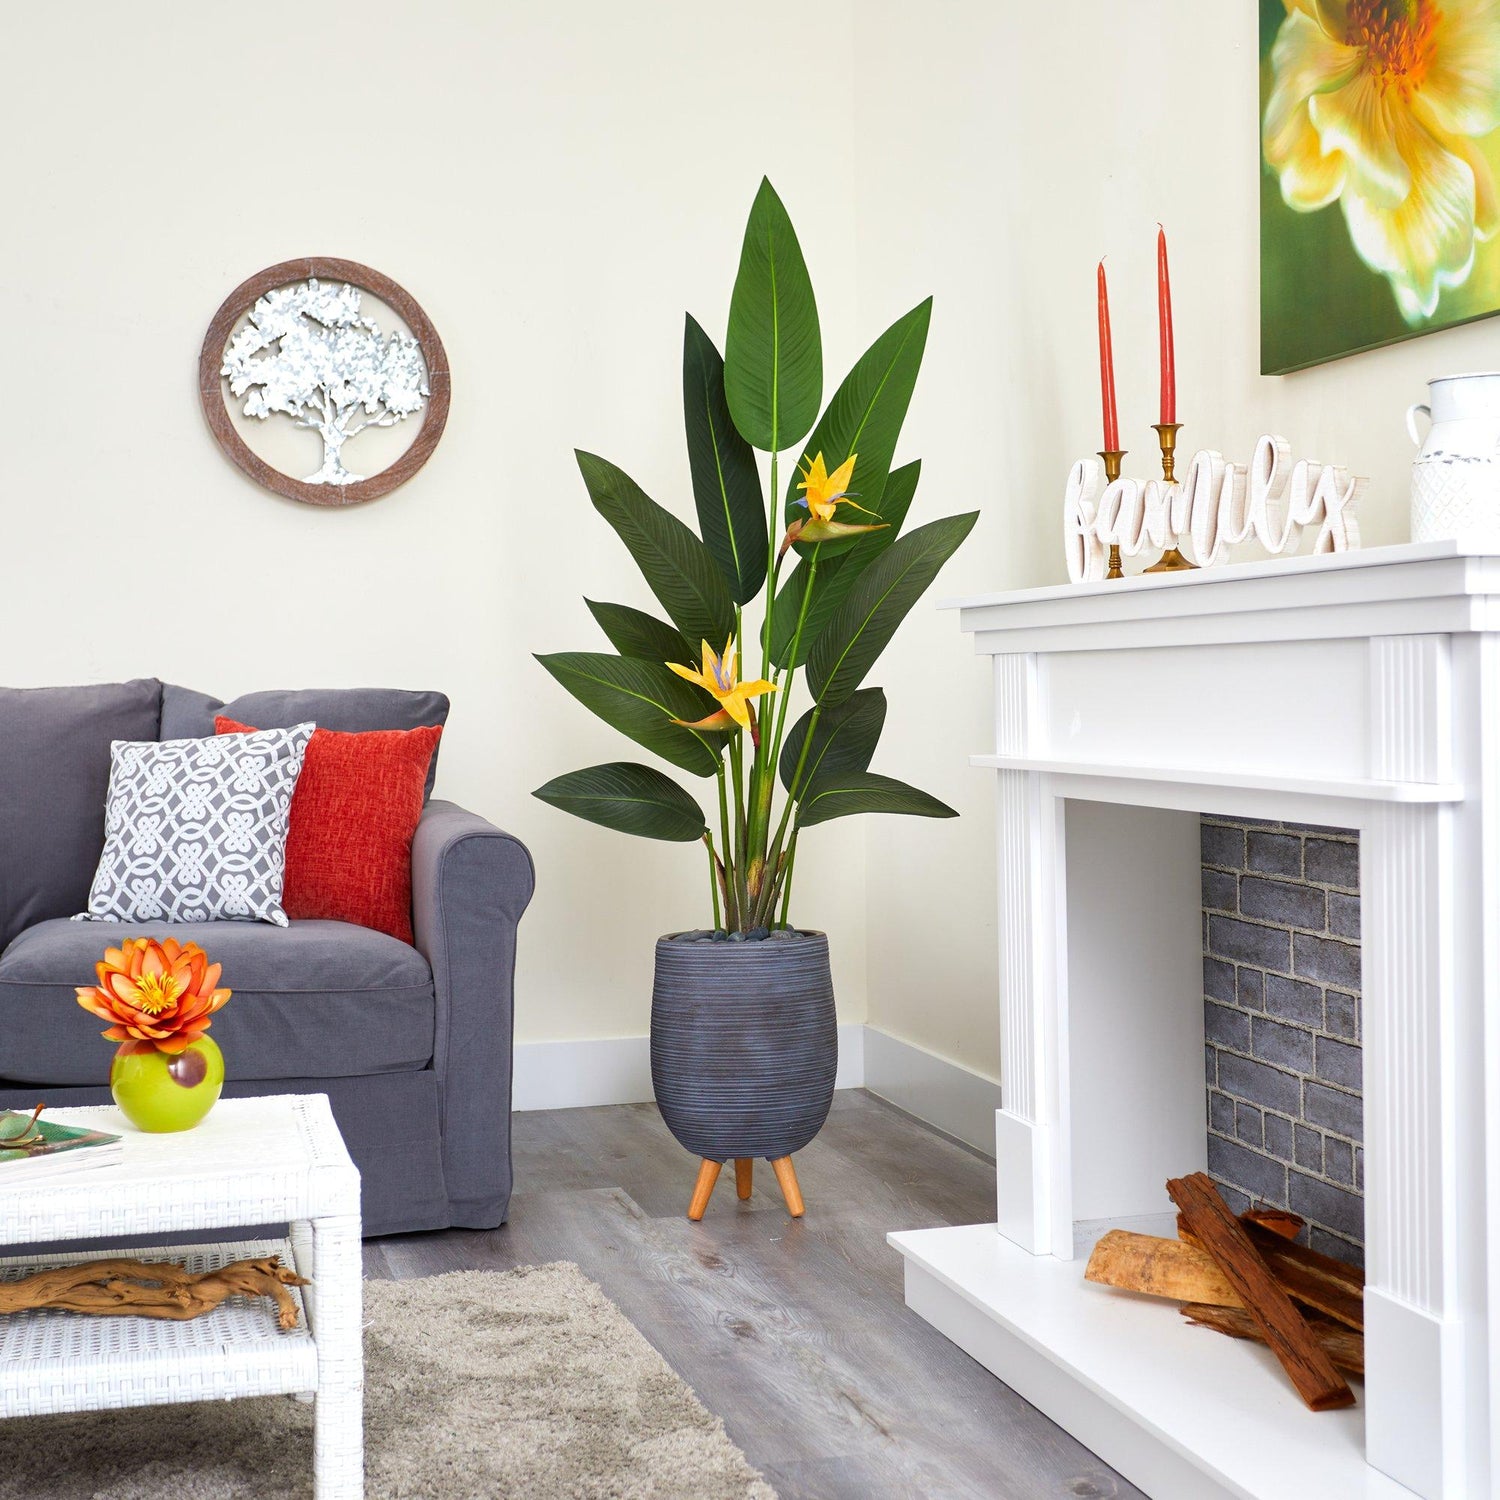 50” Bird of Paradise Artificial Plant in Gray Planter with Stand (Real Touch)